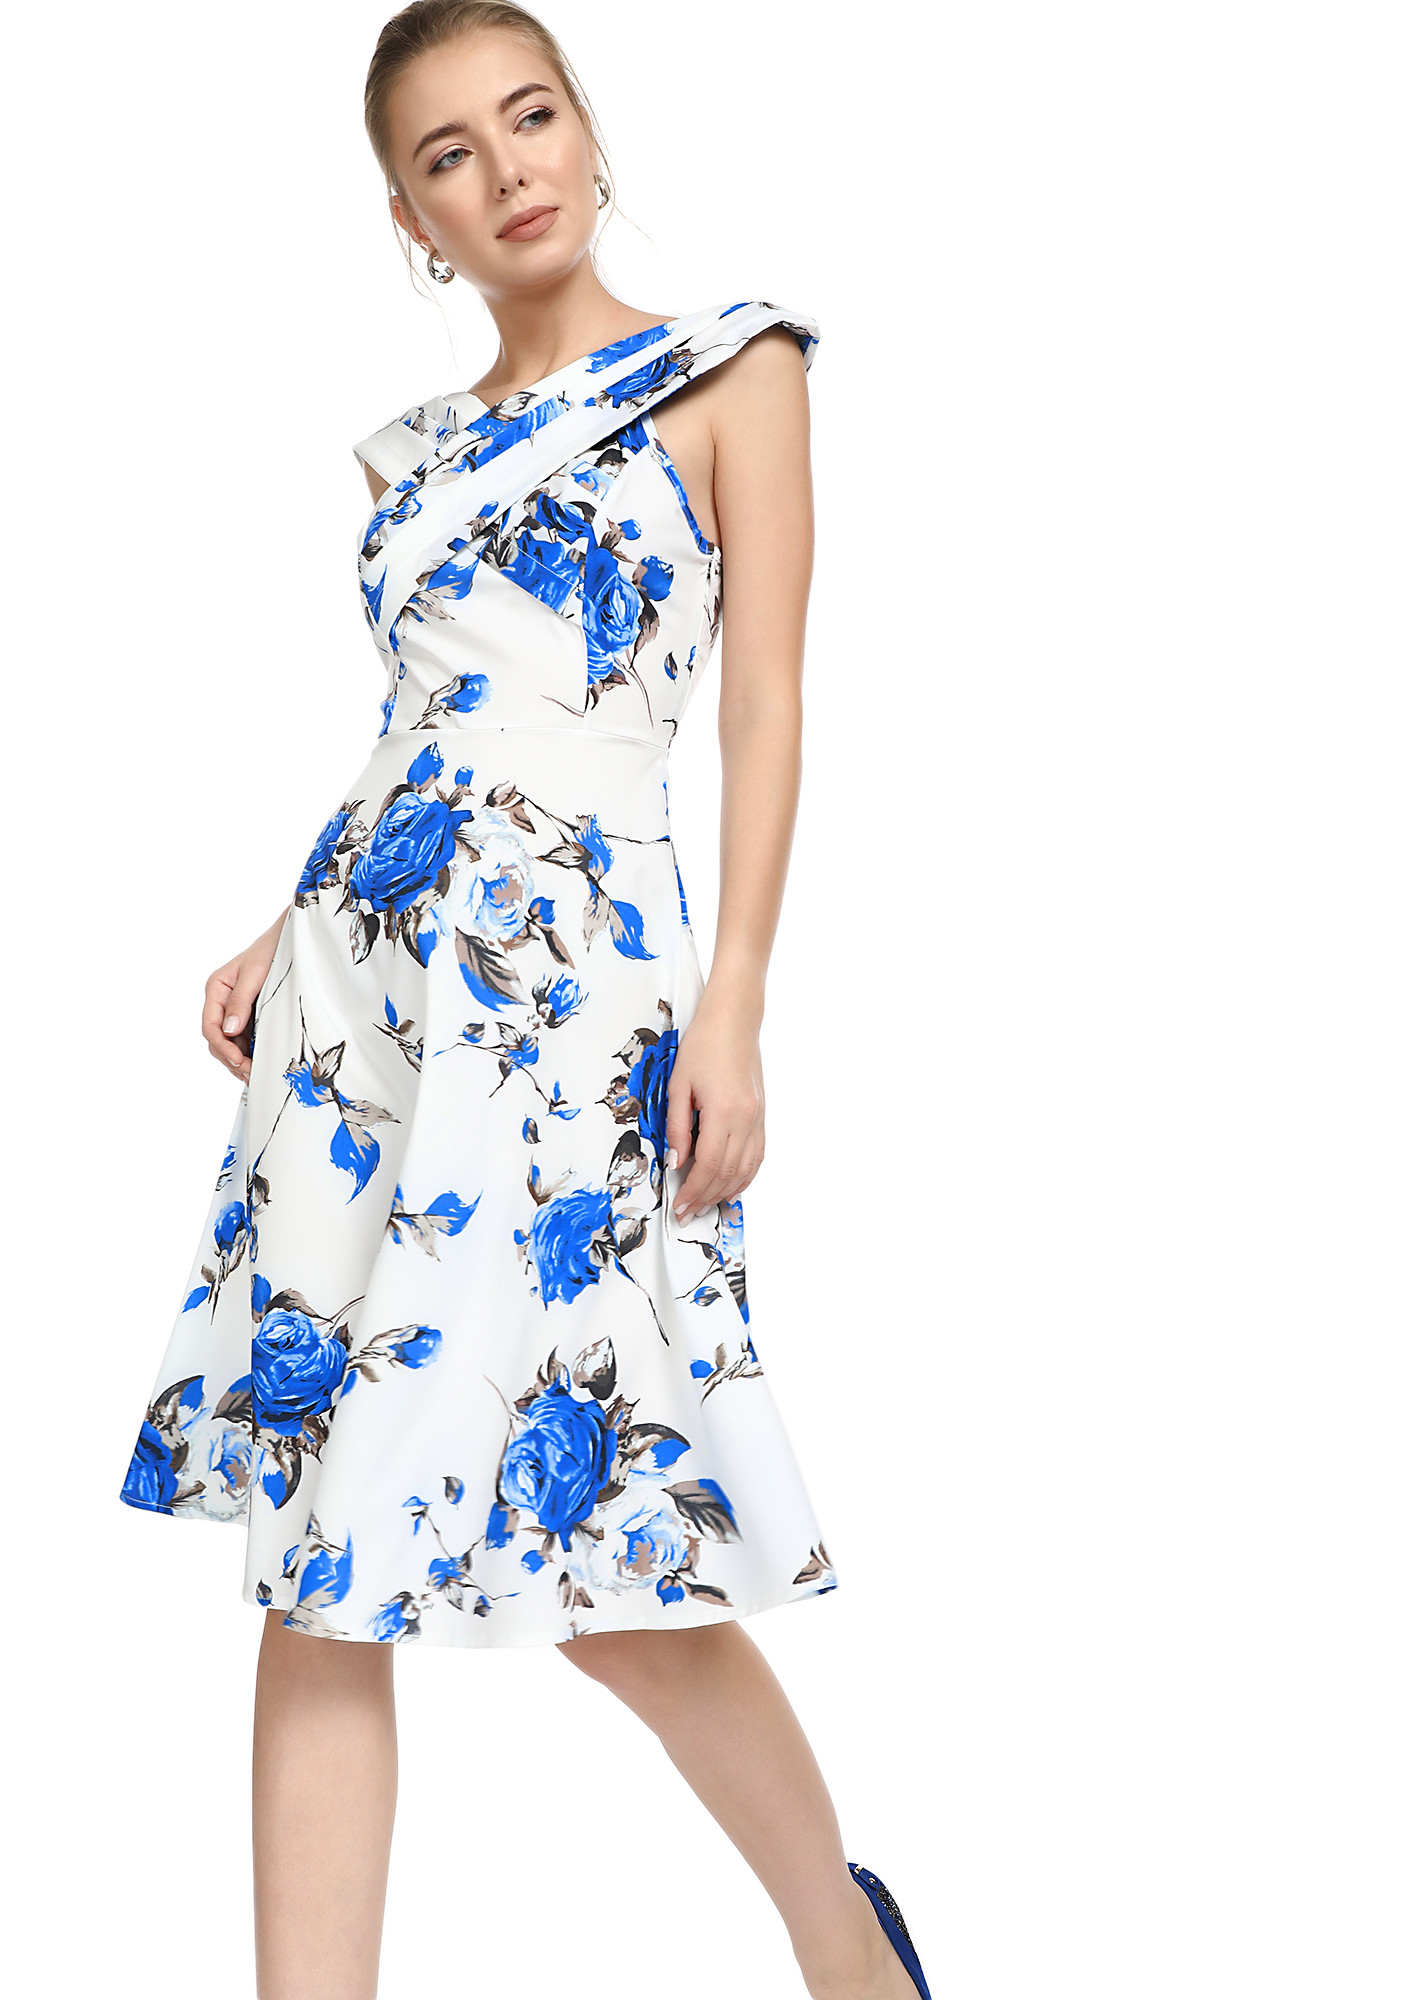 ROSES ARE BLUE FLORAL MIDI DRESS